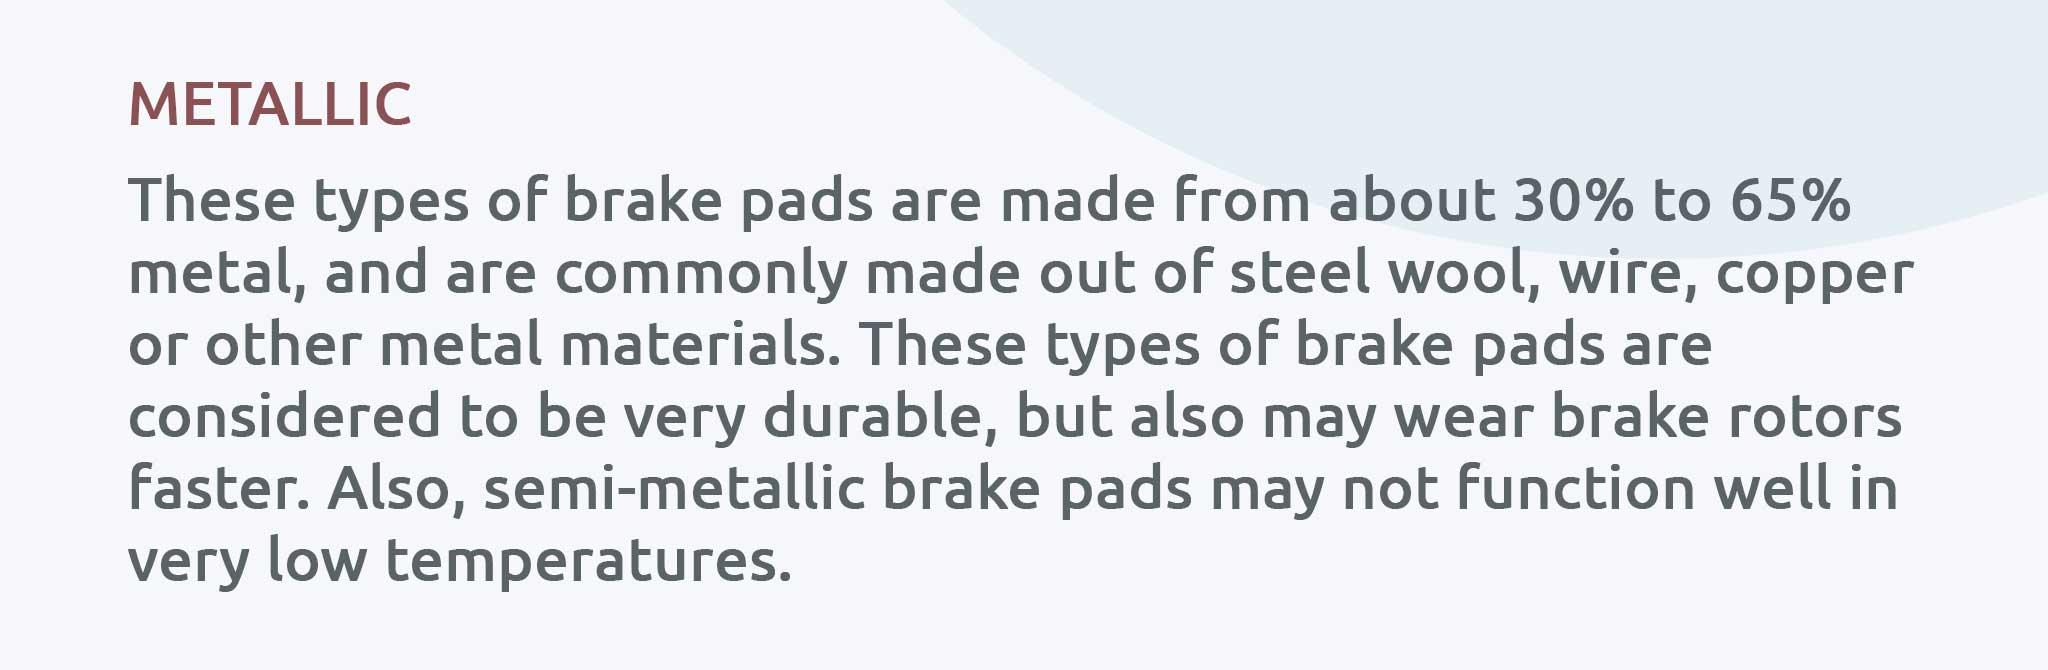 These types of brake pads are made from about 30% to 65% metal, and are commonly made out of steel wool, wire, copper or other metal materials. These types of brake pads are considered to be very durable, but also may wear brake rotors faster. Also, semi-metallic brake pads may not function well in very low temperatures.